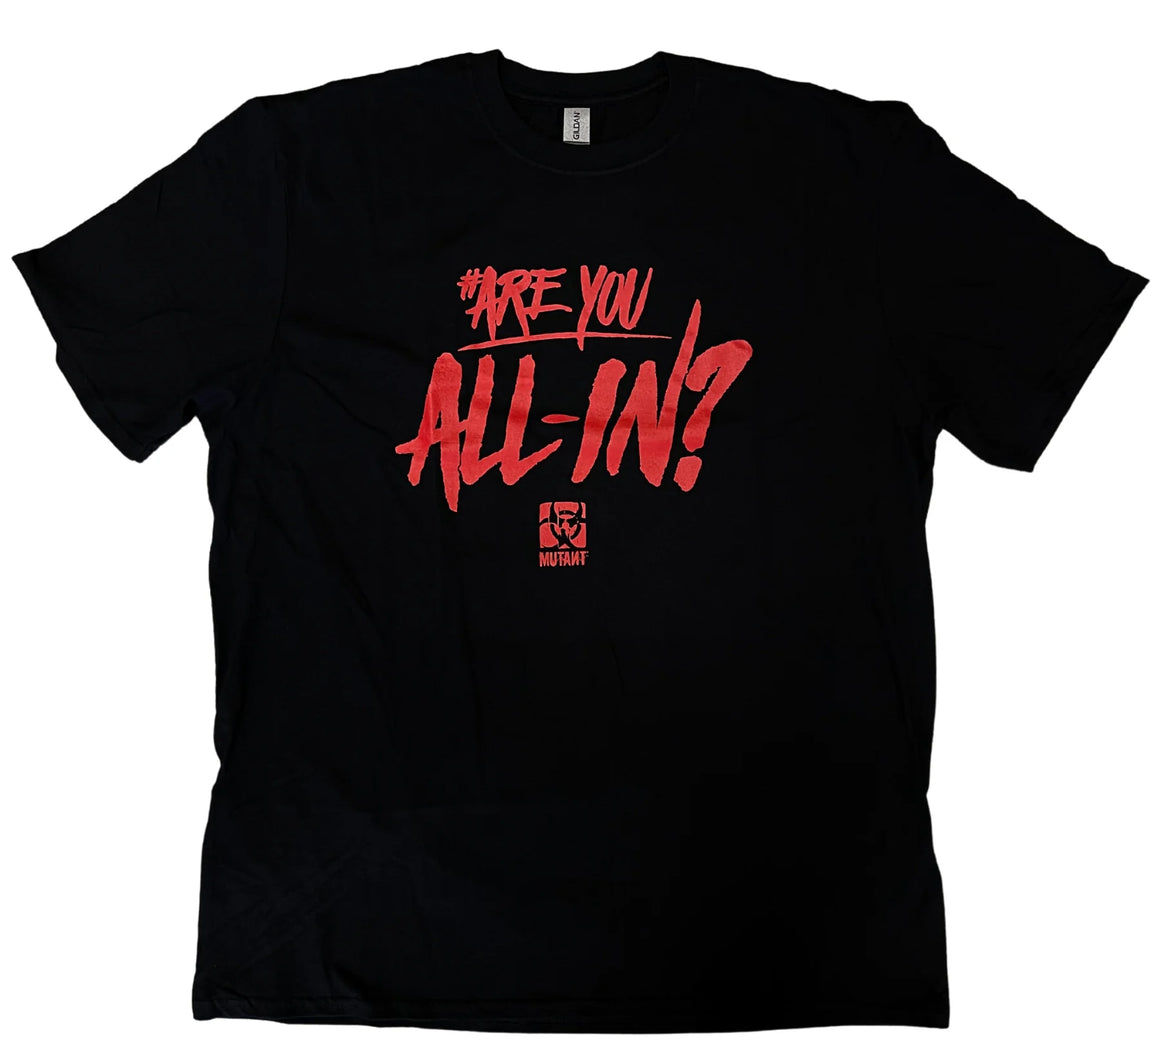 Mutant (#Are You All-In?) T-Shirt